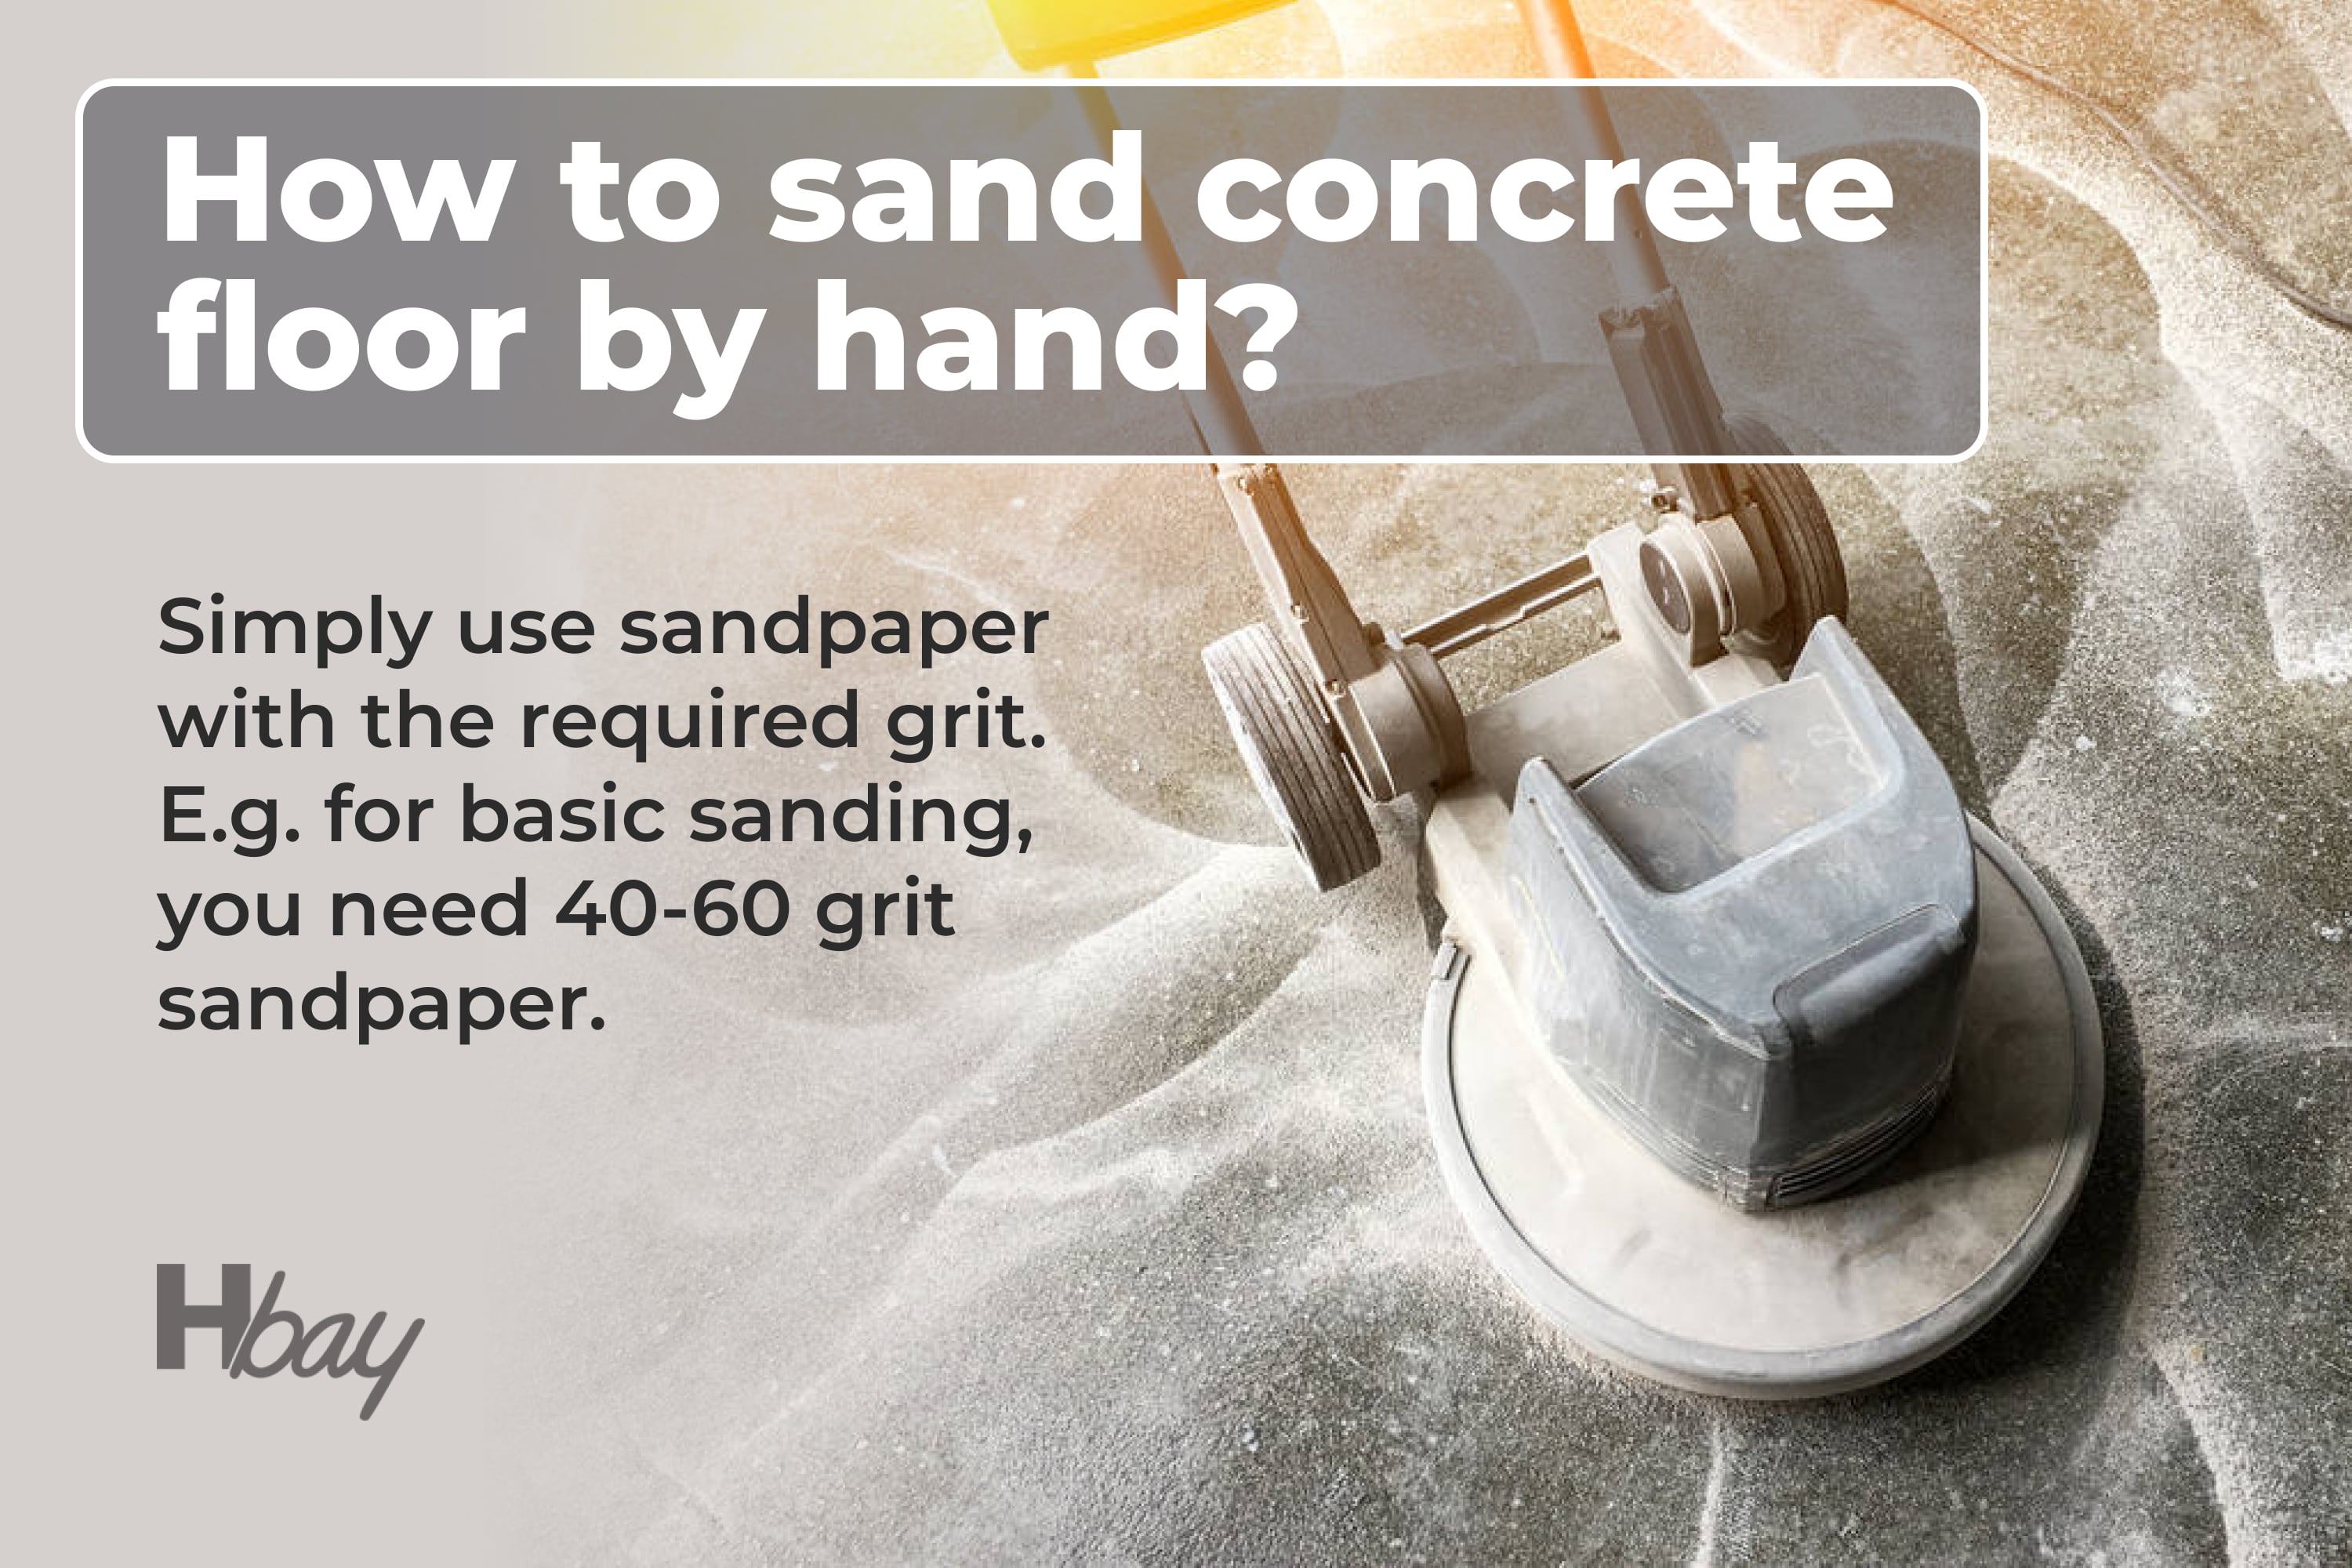 How to sand concrete floor by hand